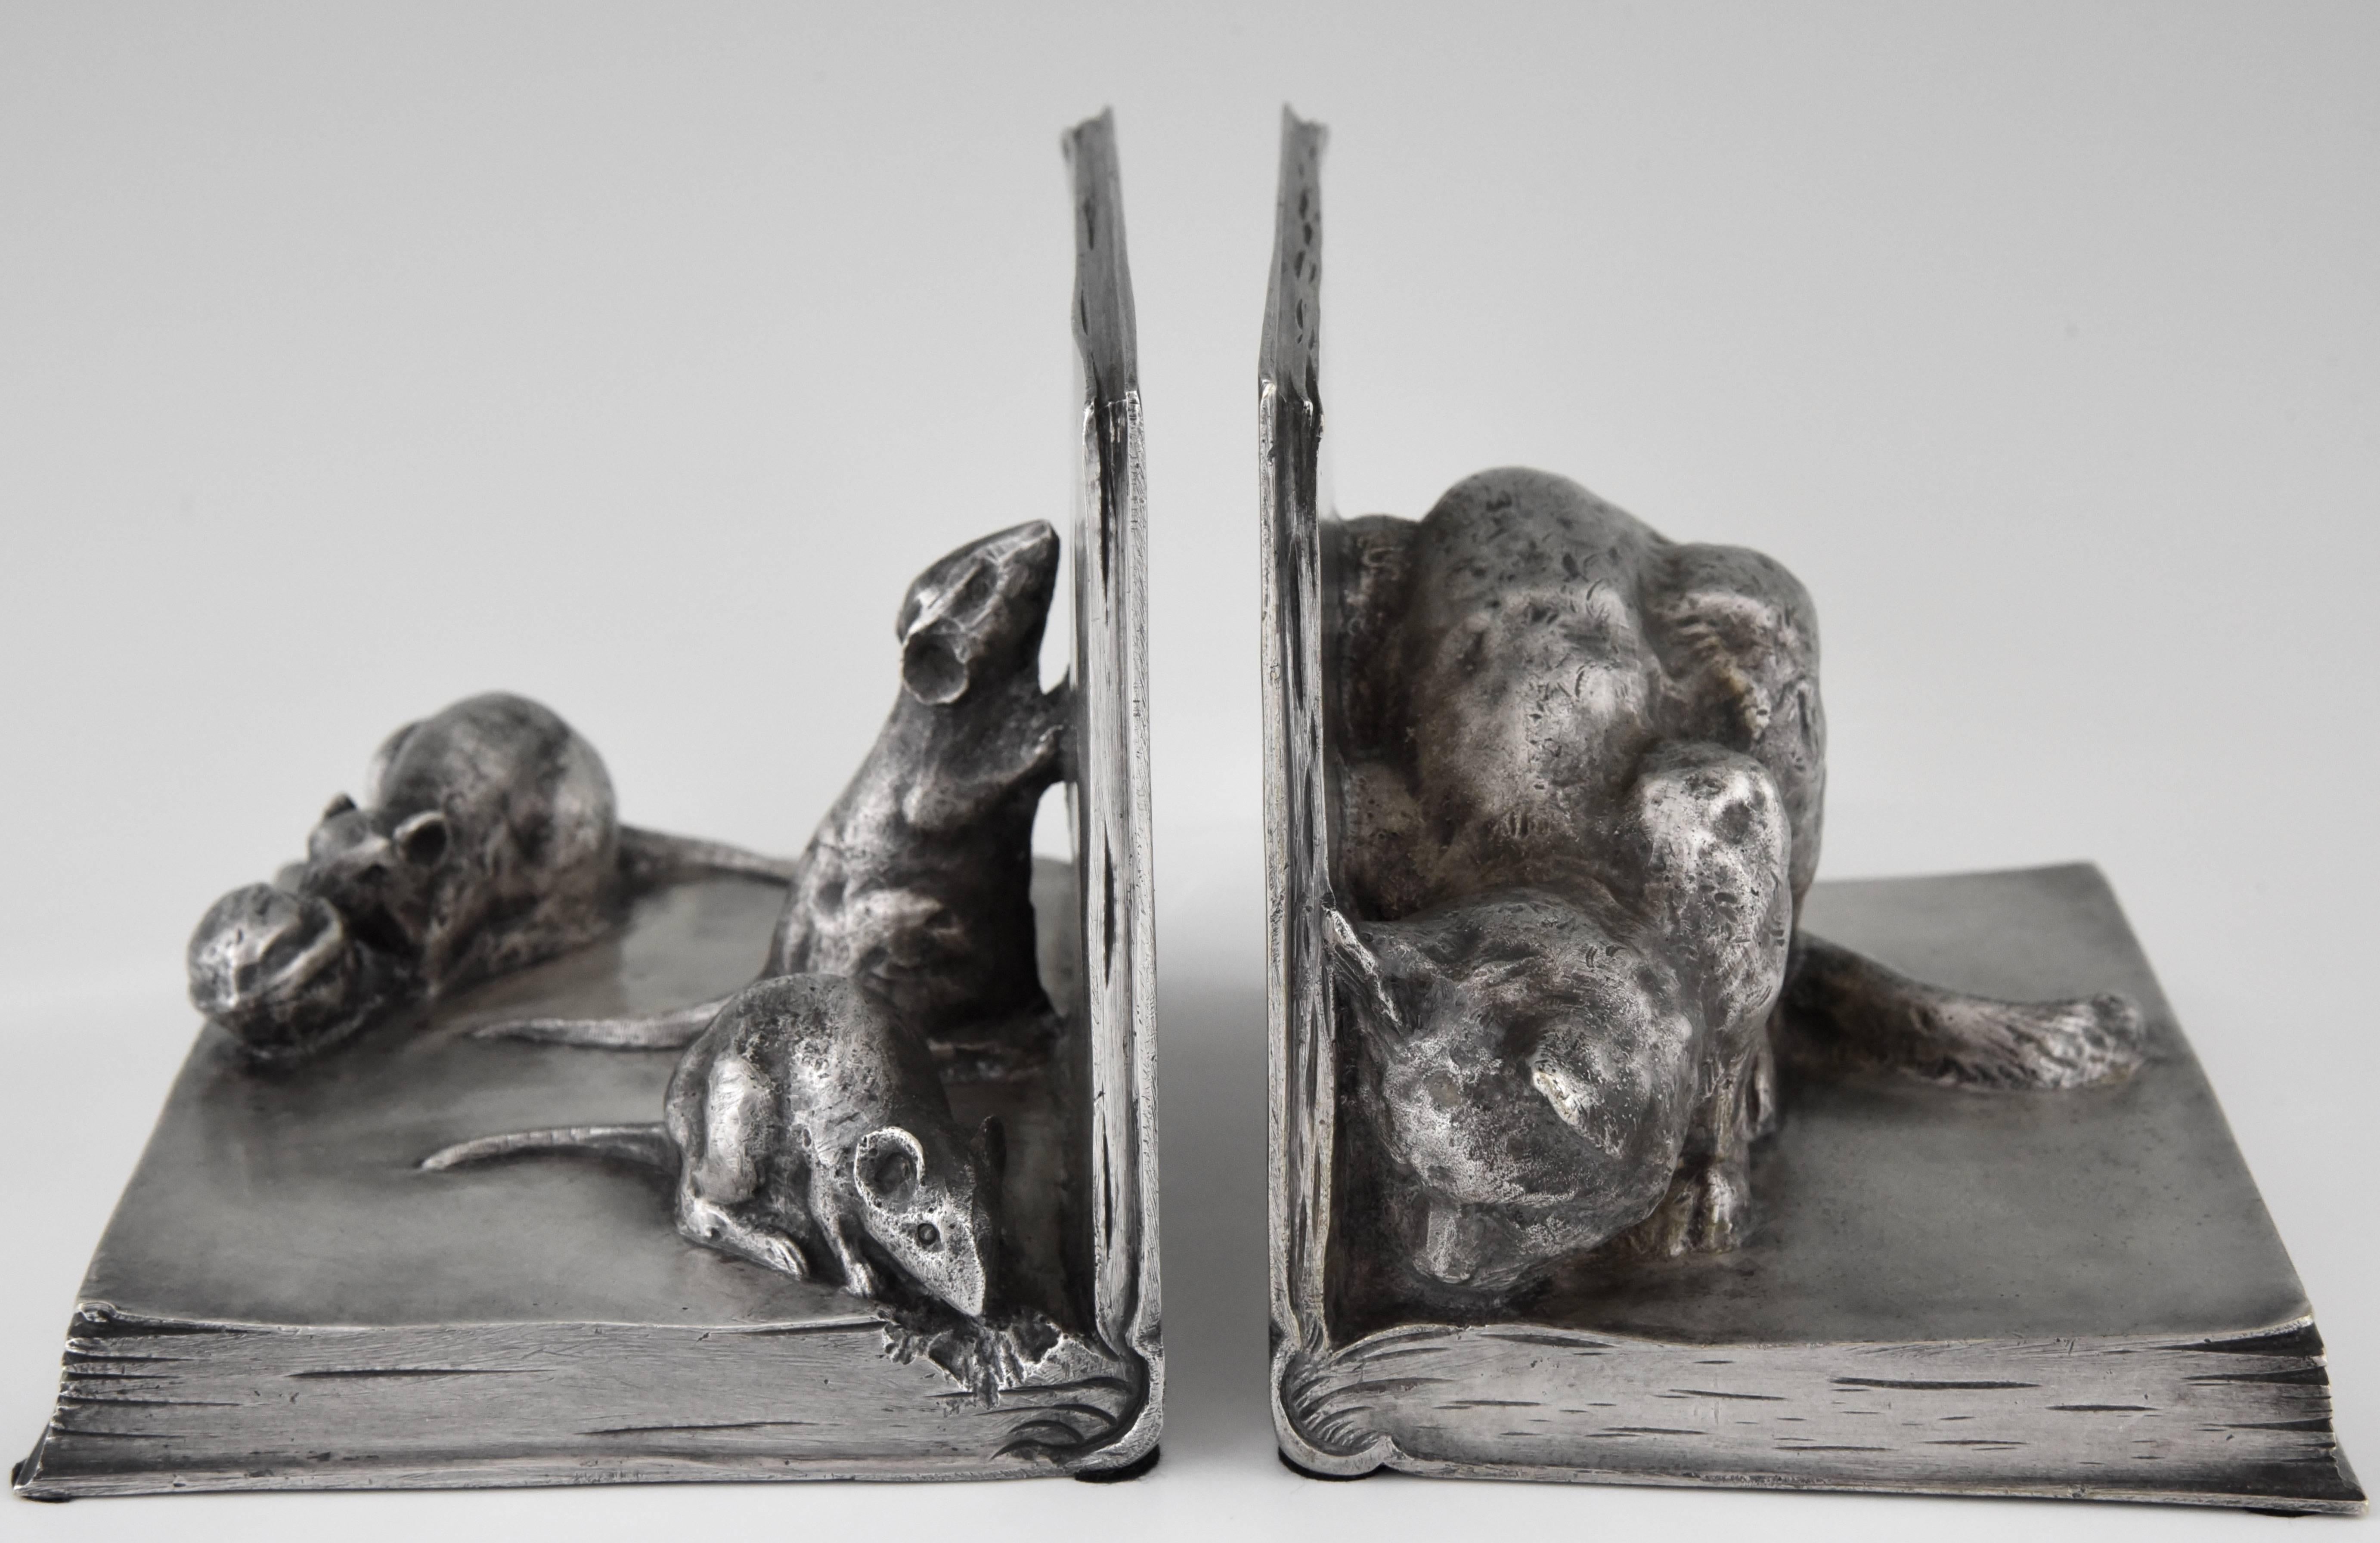 Art Deco bronze bookends, cat and mice on books by A. Duchêne
Signature/ Marks: A. Duchêne.
Style: Art Deco
Date: 1920
Material: Bronze with old silver patina.
Origin: France
Size: H 11.5 cm. x L 16 cm. x W 11 cm.? each 
H 4.5 inch x L 6.3